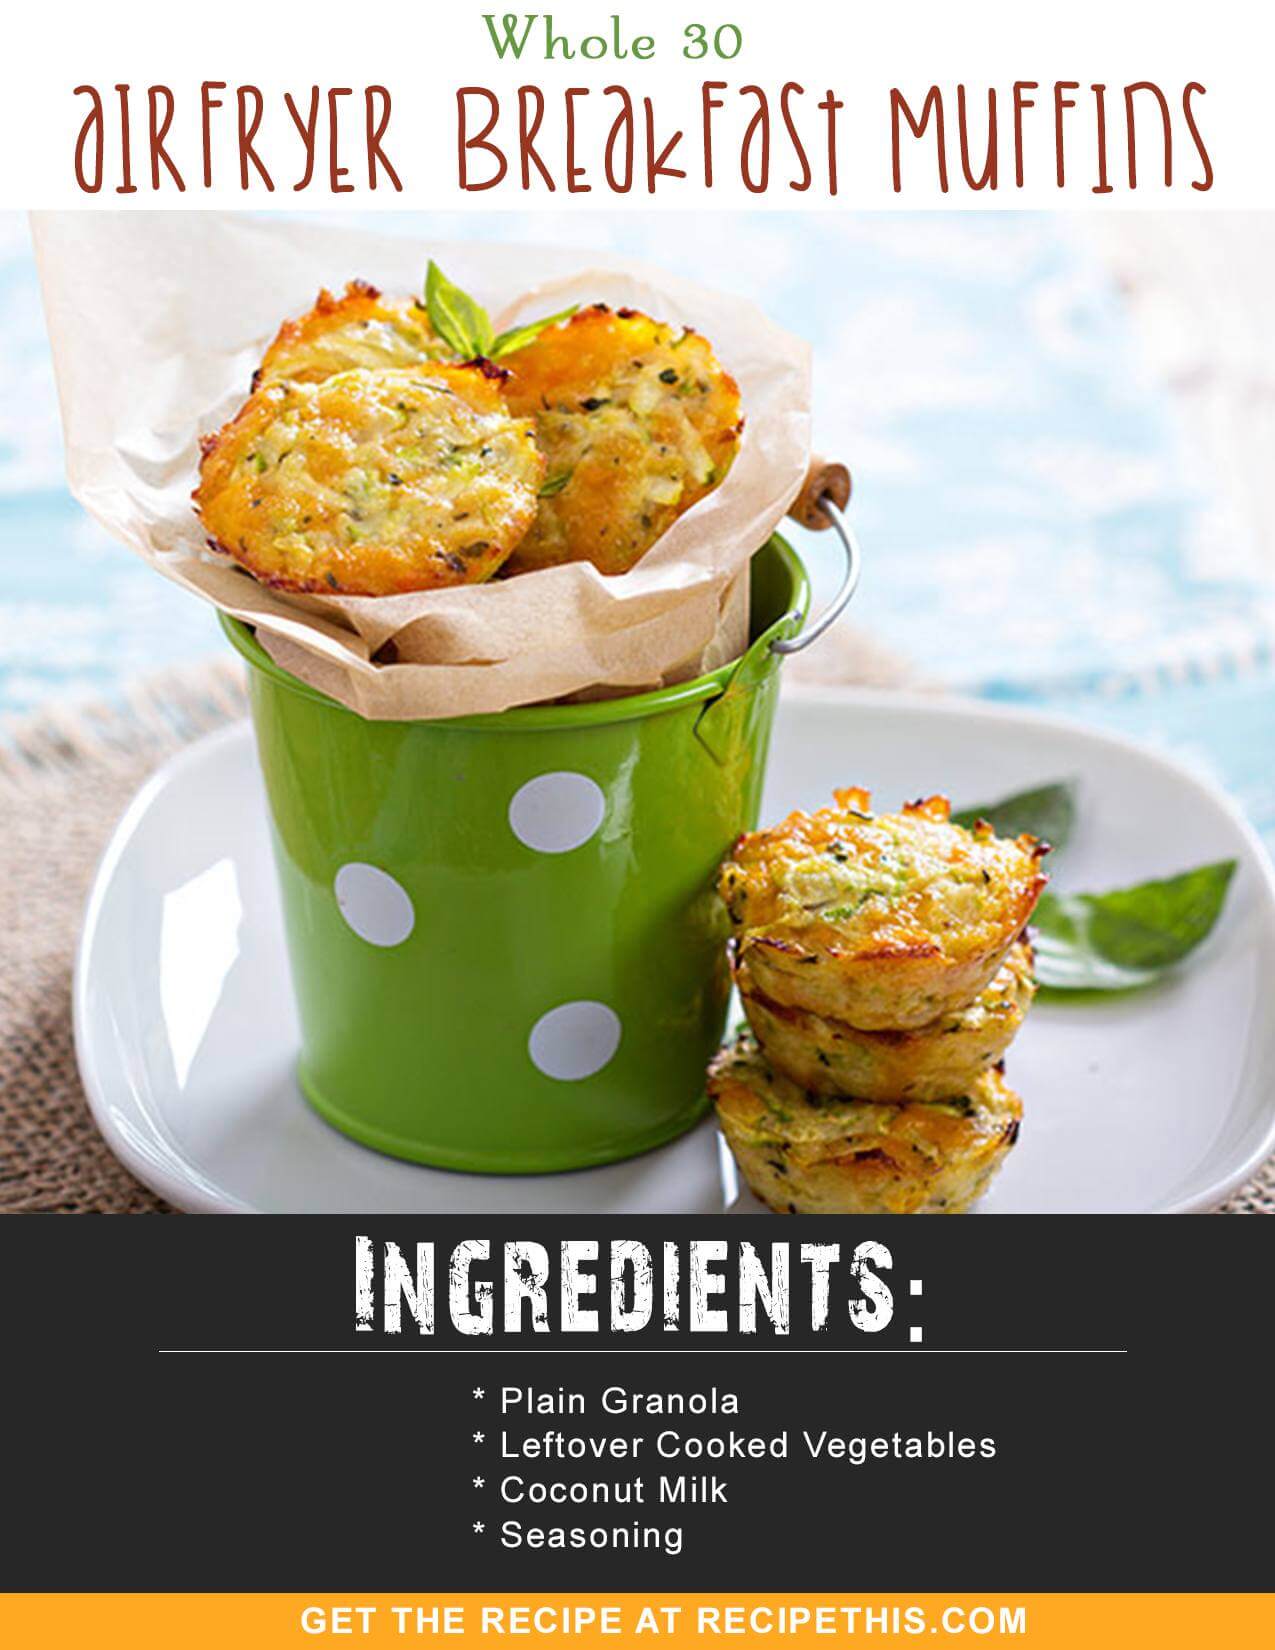 Whole 30 | Whole 30 Airfryer Breakfast Muffins recipe from RecipeThis.com